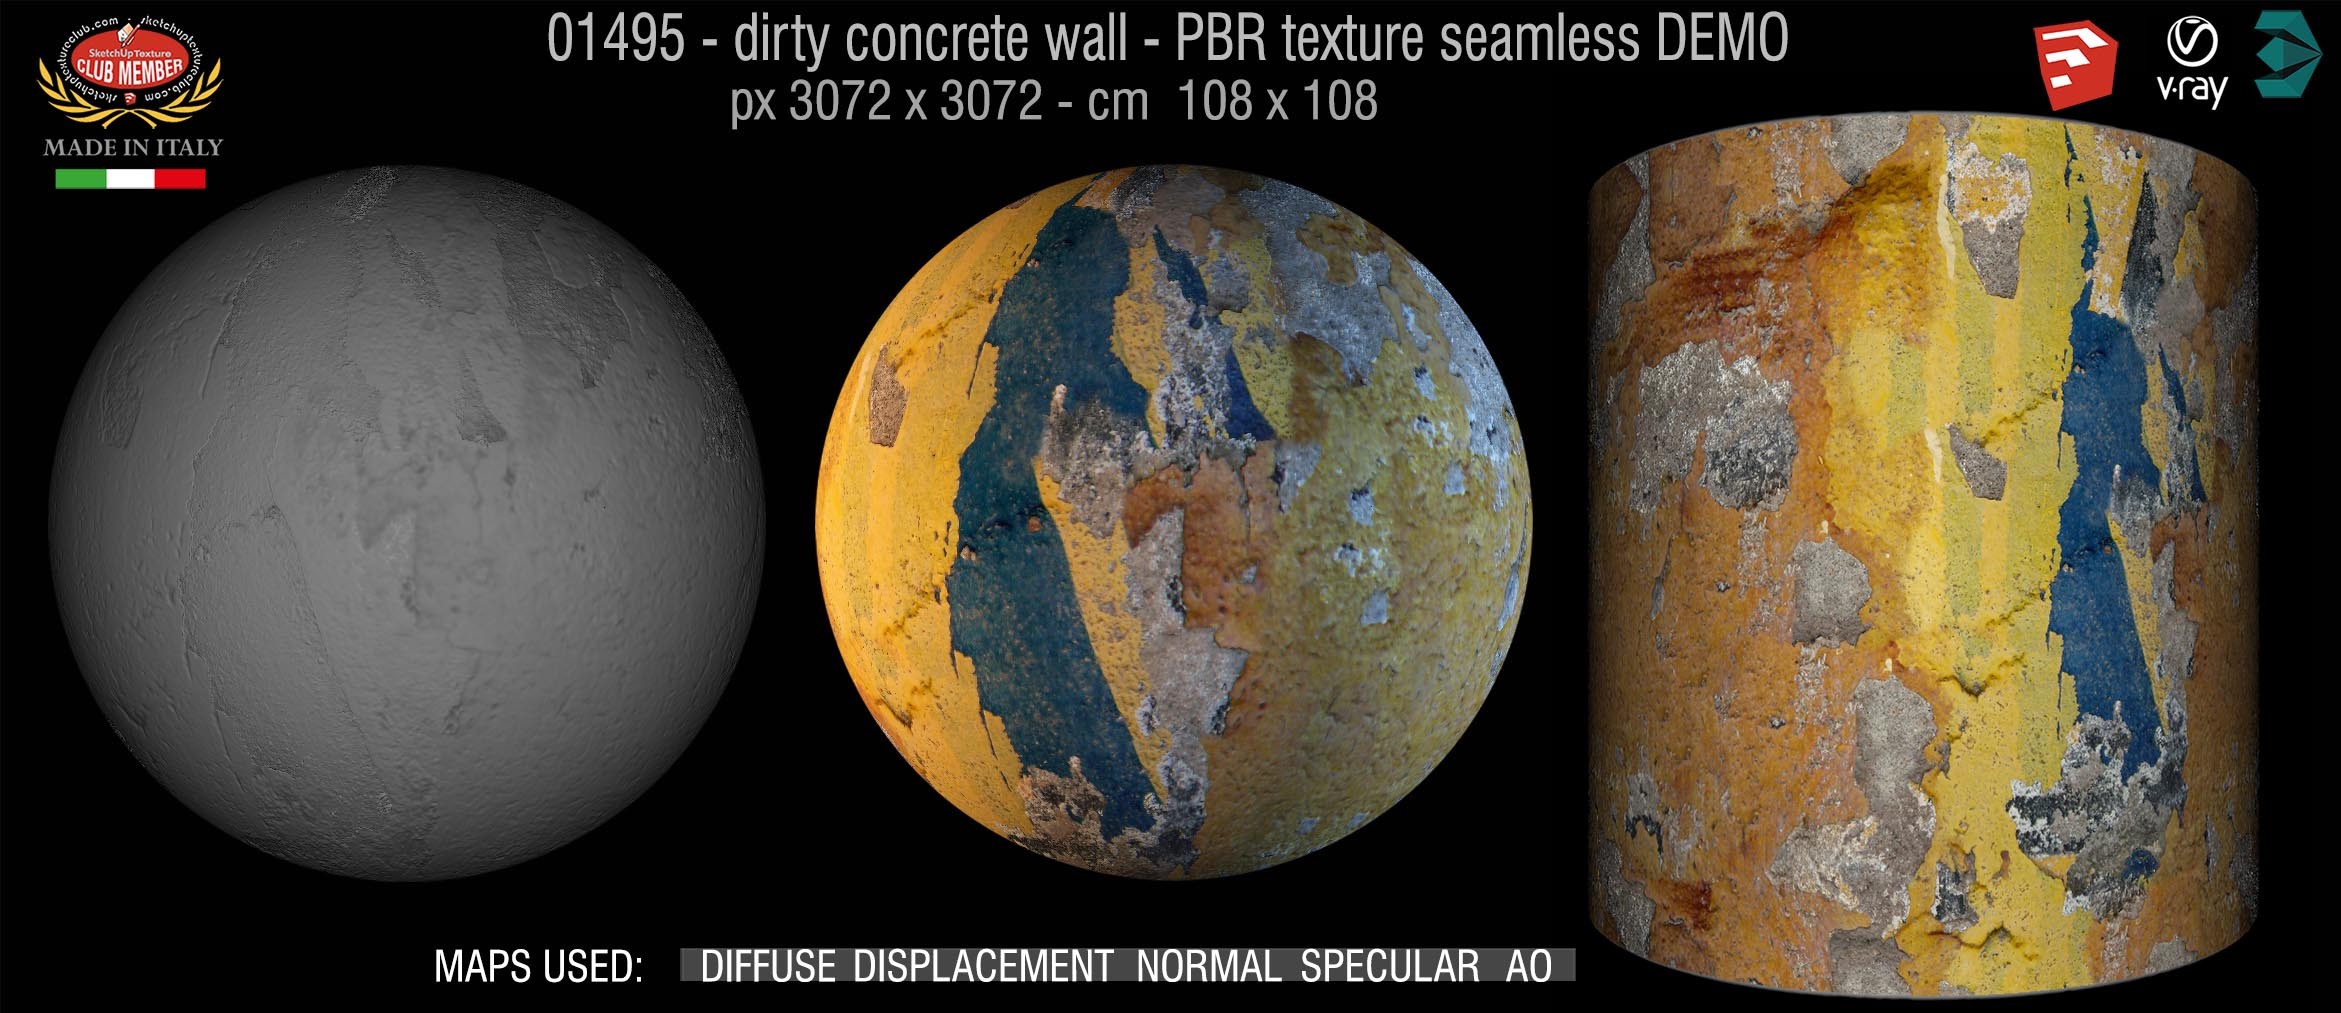 01495 Concrete bare dirty wall PBR texture seamless DEMO